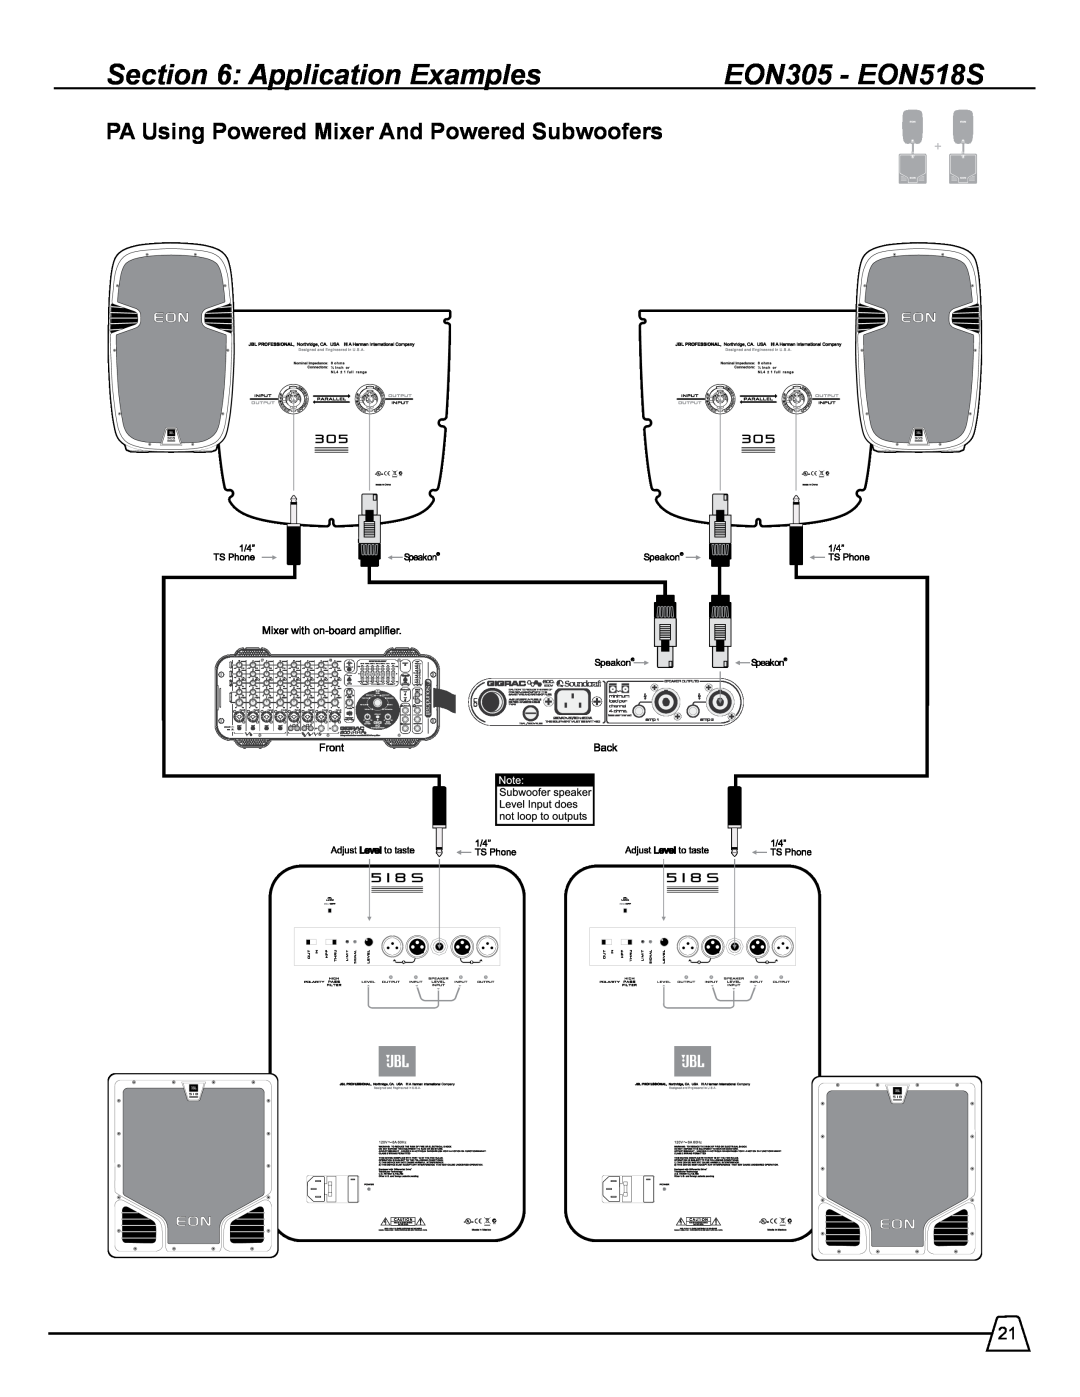 Harman manual EON305 - EON518S, PA Using Powered Mixer And Powered Subwoofers, Application Examples 